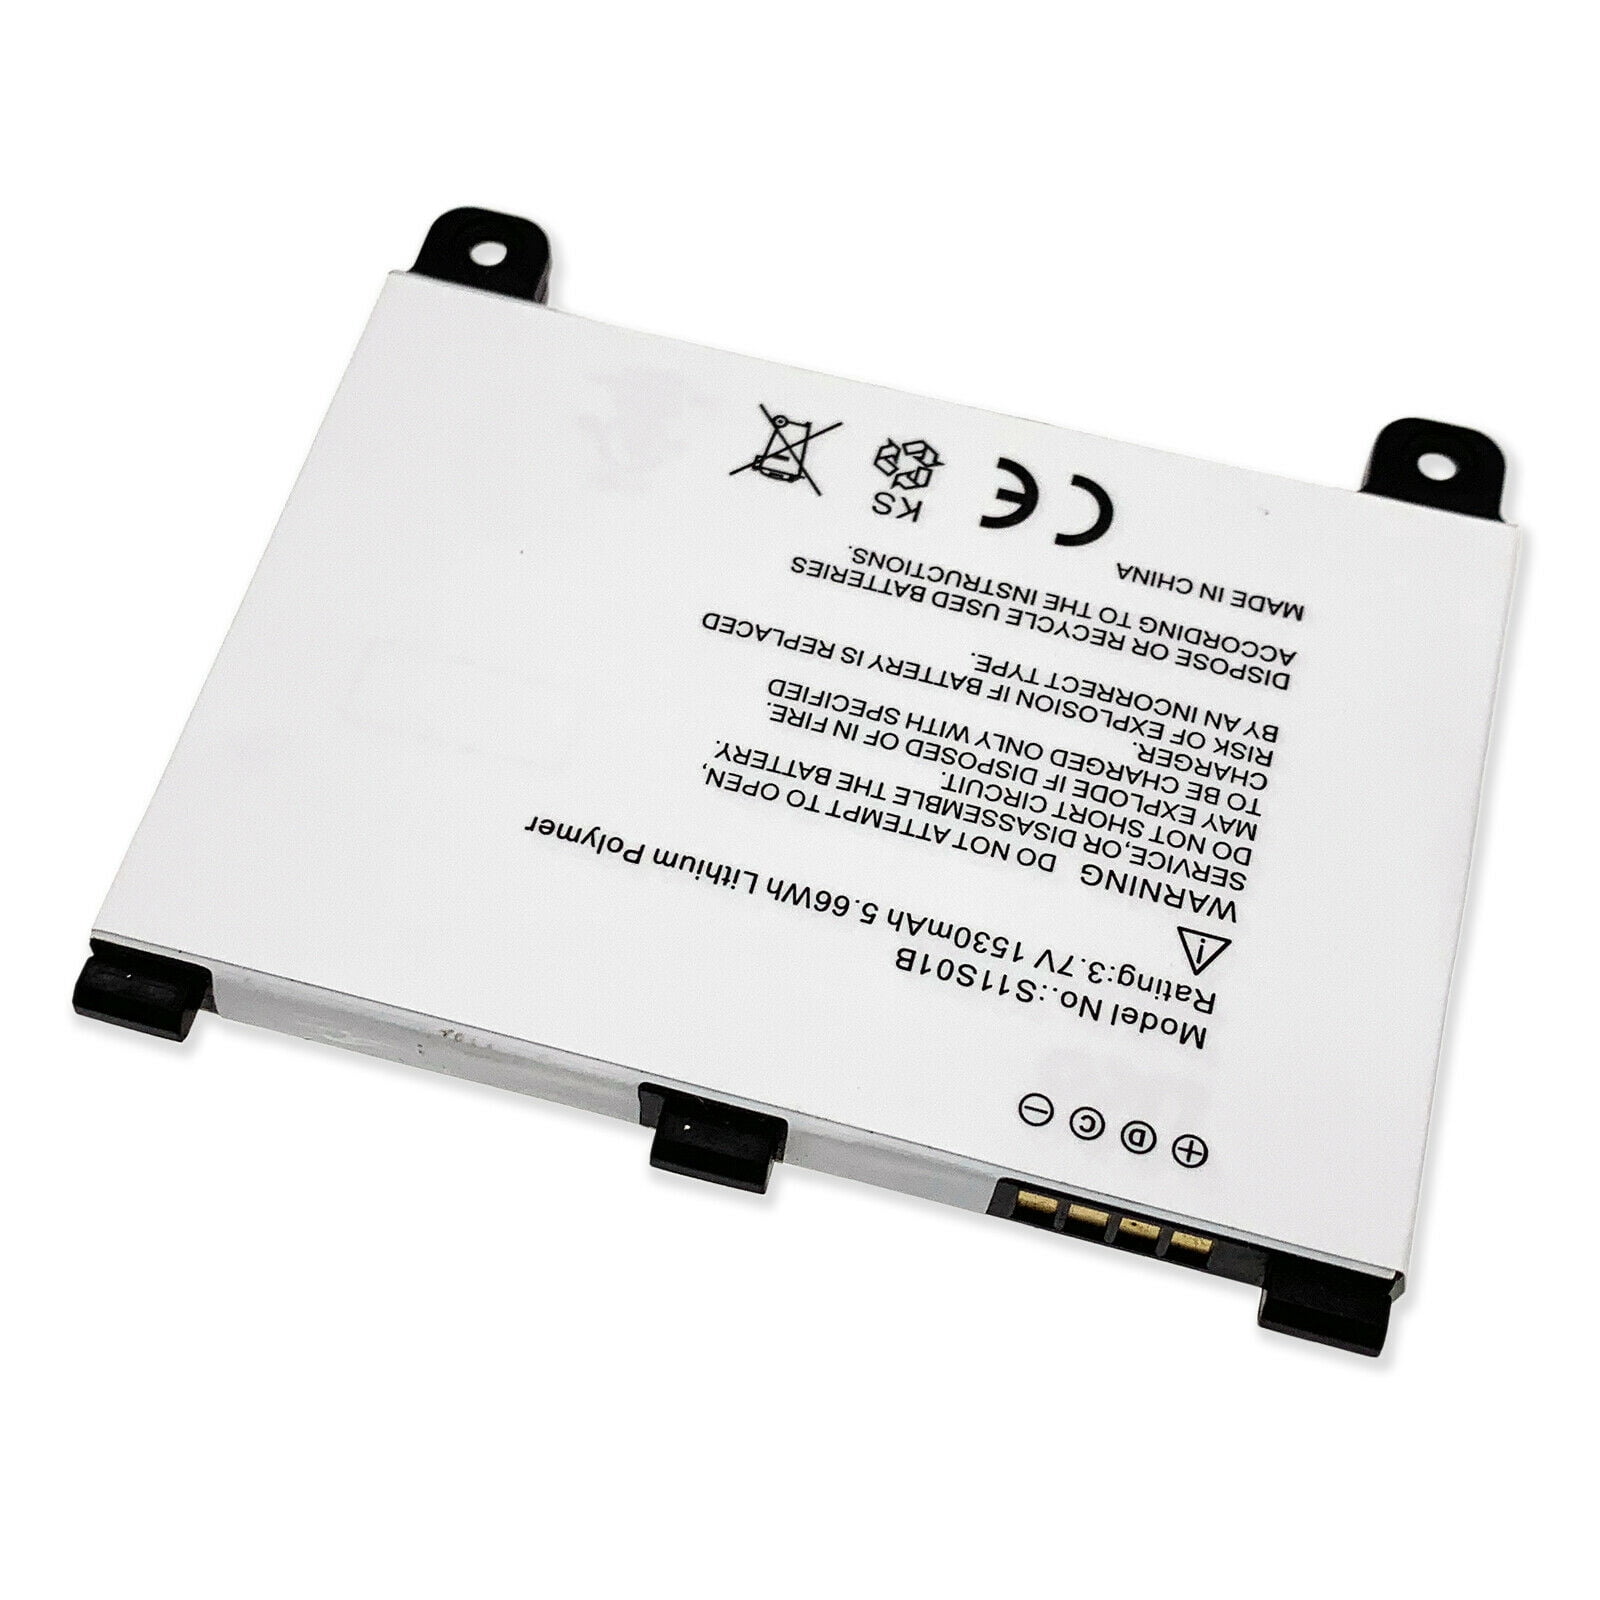 OEM S11S01B Battery for AMAZON Kindle 2 D00701 DX DXG D00701 WiFi S11S01A 3.7V 